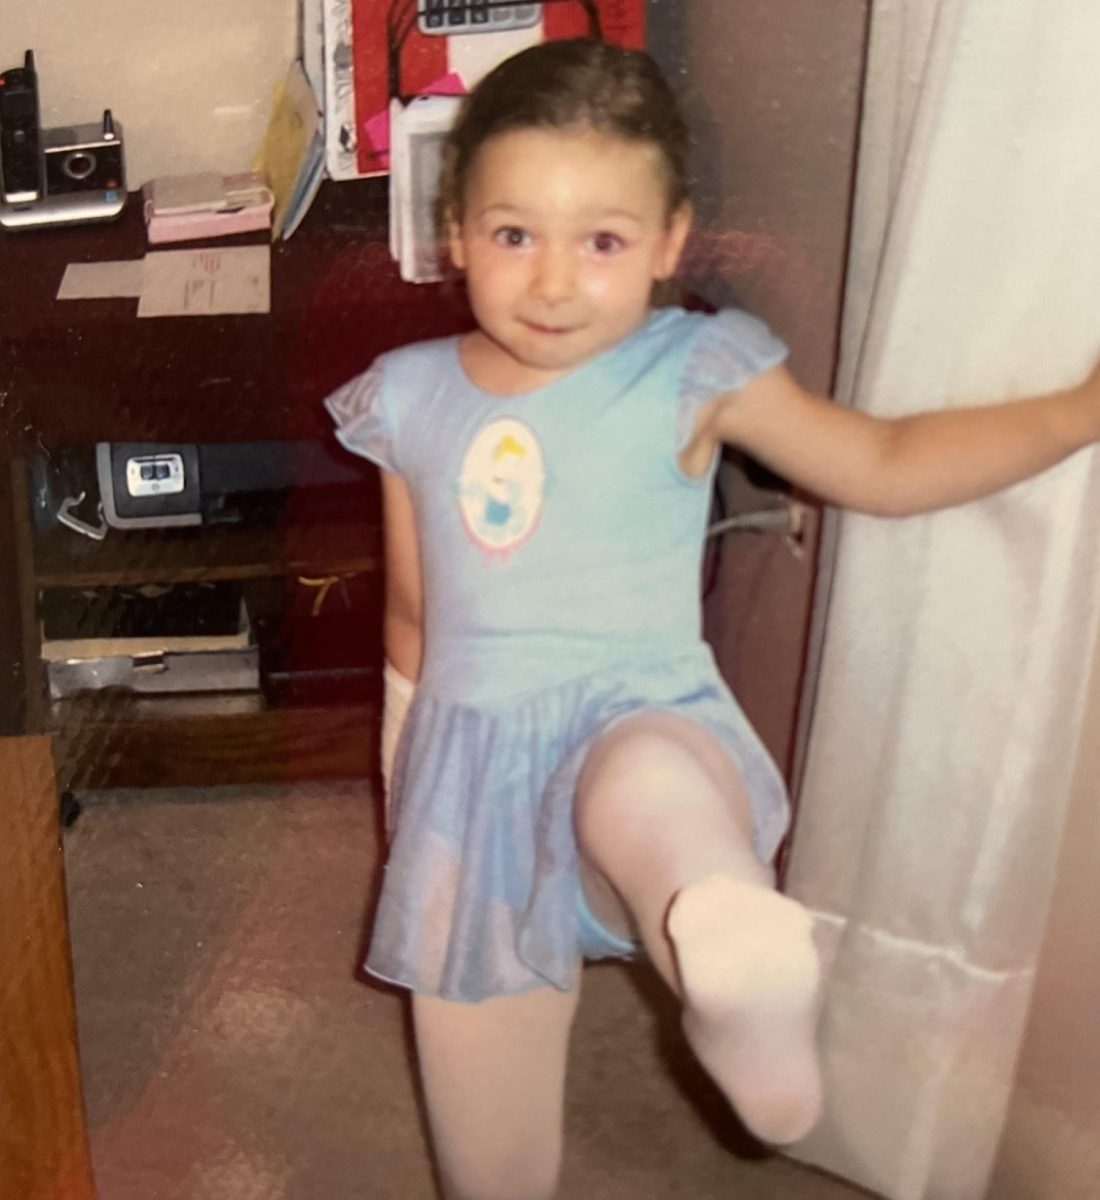 At four years old, I began taking ballet and tap lessons.